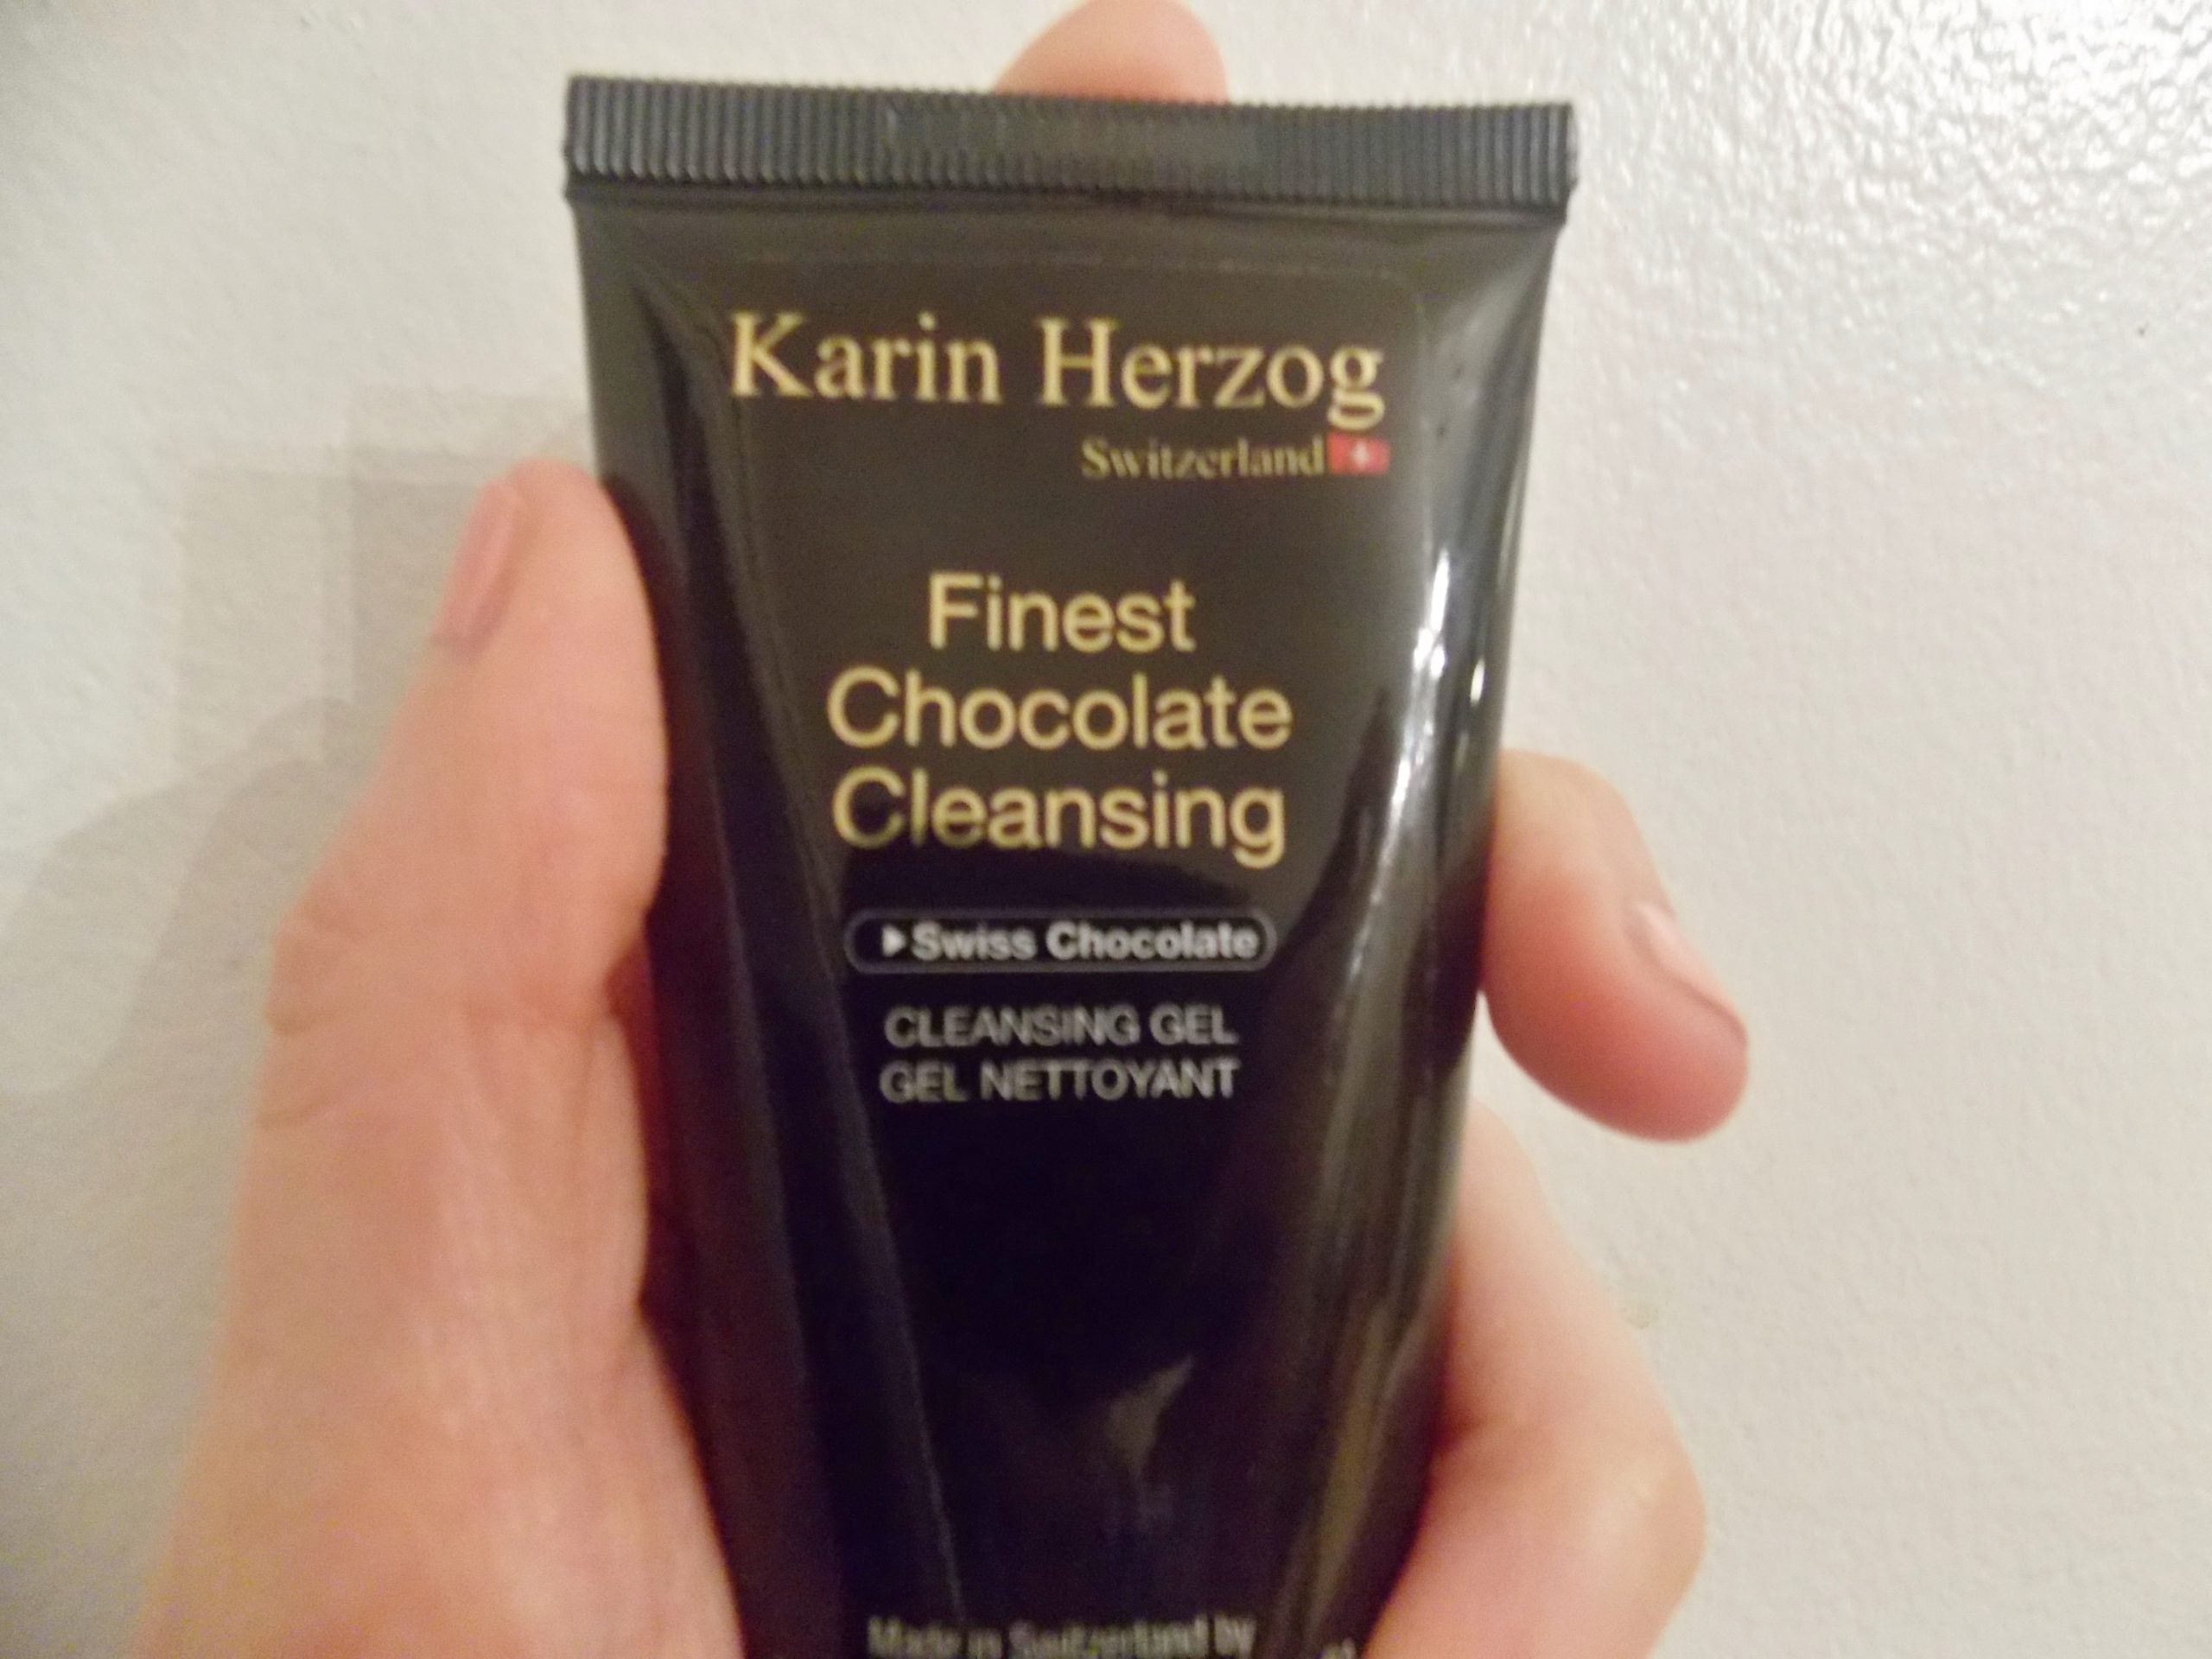 Review, Ingredients: How To Get Clear, Hydrated Skin With Karin Herzog Skincare - Princess Kate Middleton's Secret Weapon!